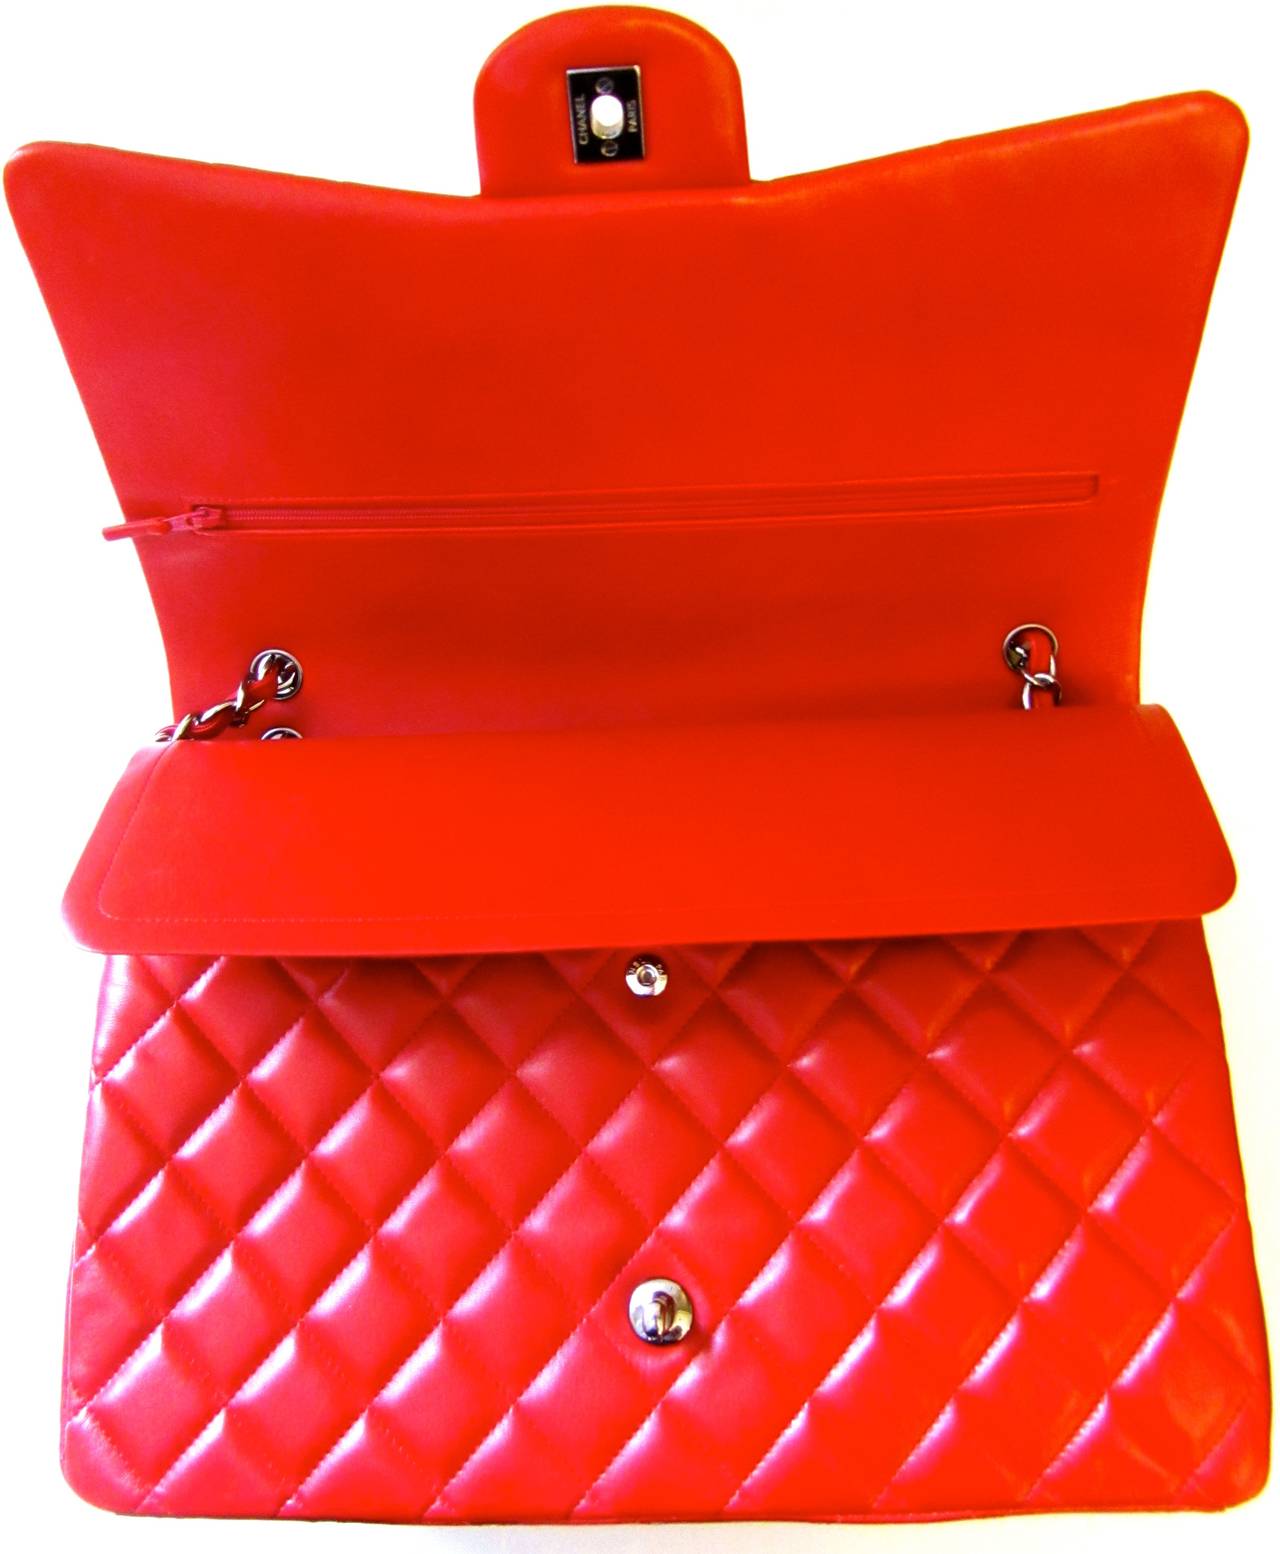 New Chanel classic double flap maxi hand bag in red. Gorgeous lambskin with classic Chanel chain for handle. Titanium colored hardware. Snap close on interior pocket. 

Remarkable bag for any occasion in a highly sought after color. Gorgeous bag